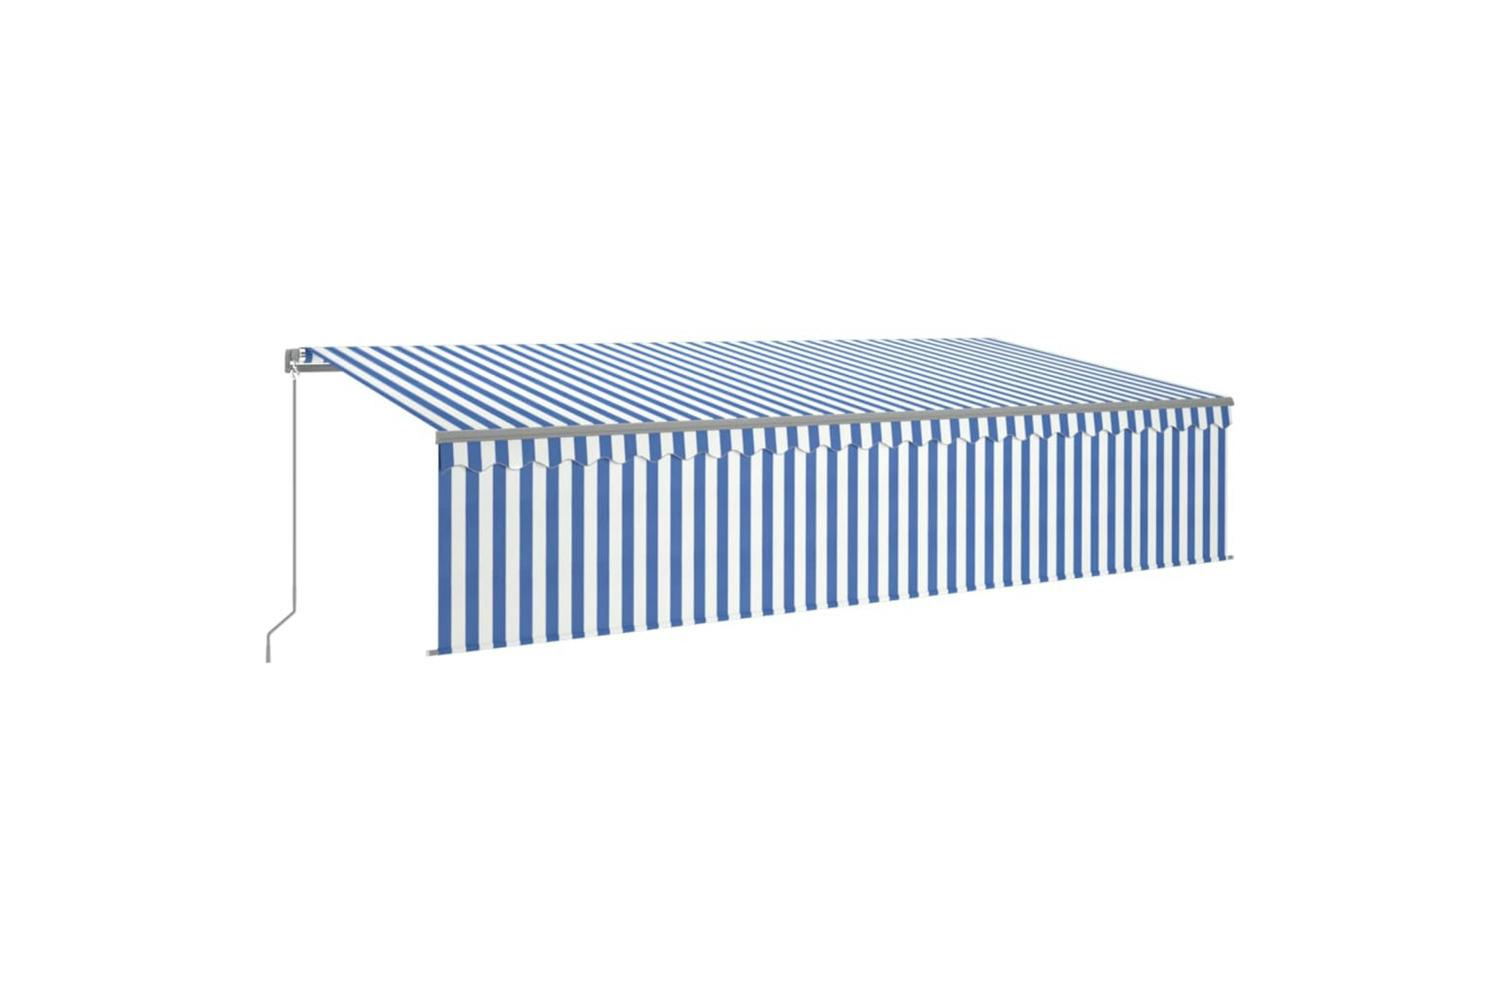 Vidaxl 3069481 Manual Retractable Awning With Blind&led 6x3m Blue&white